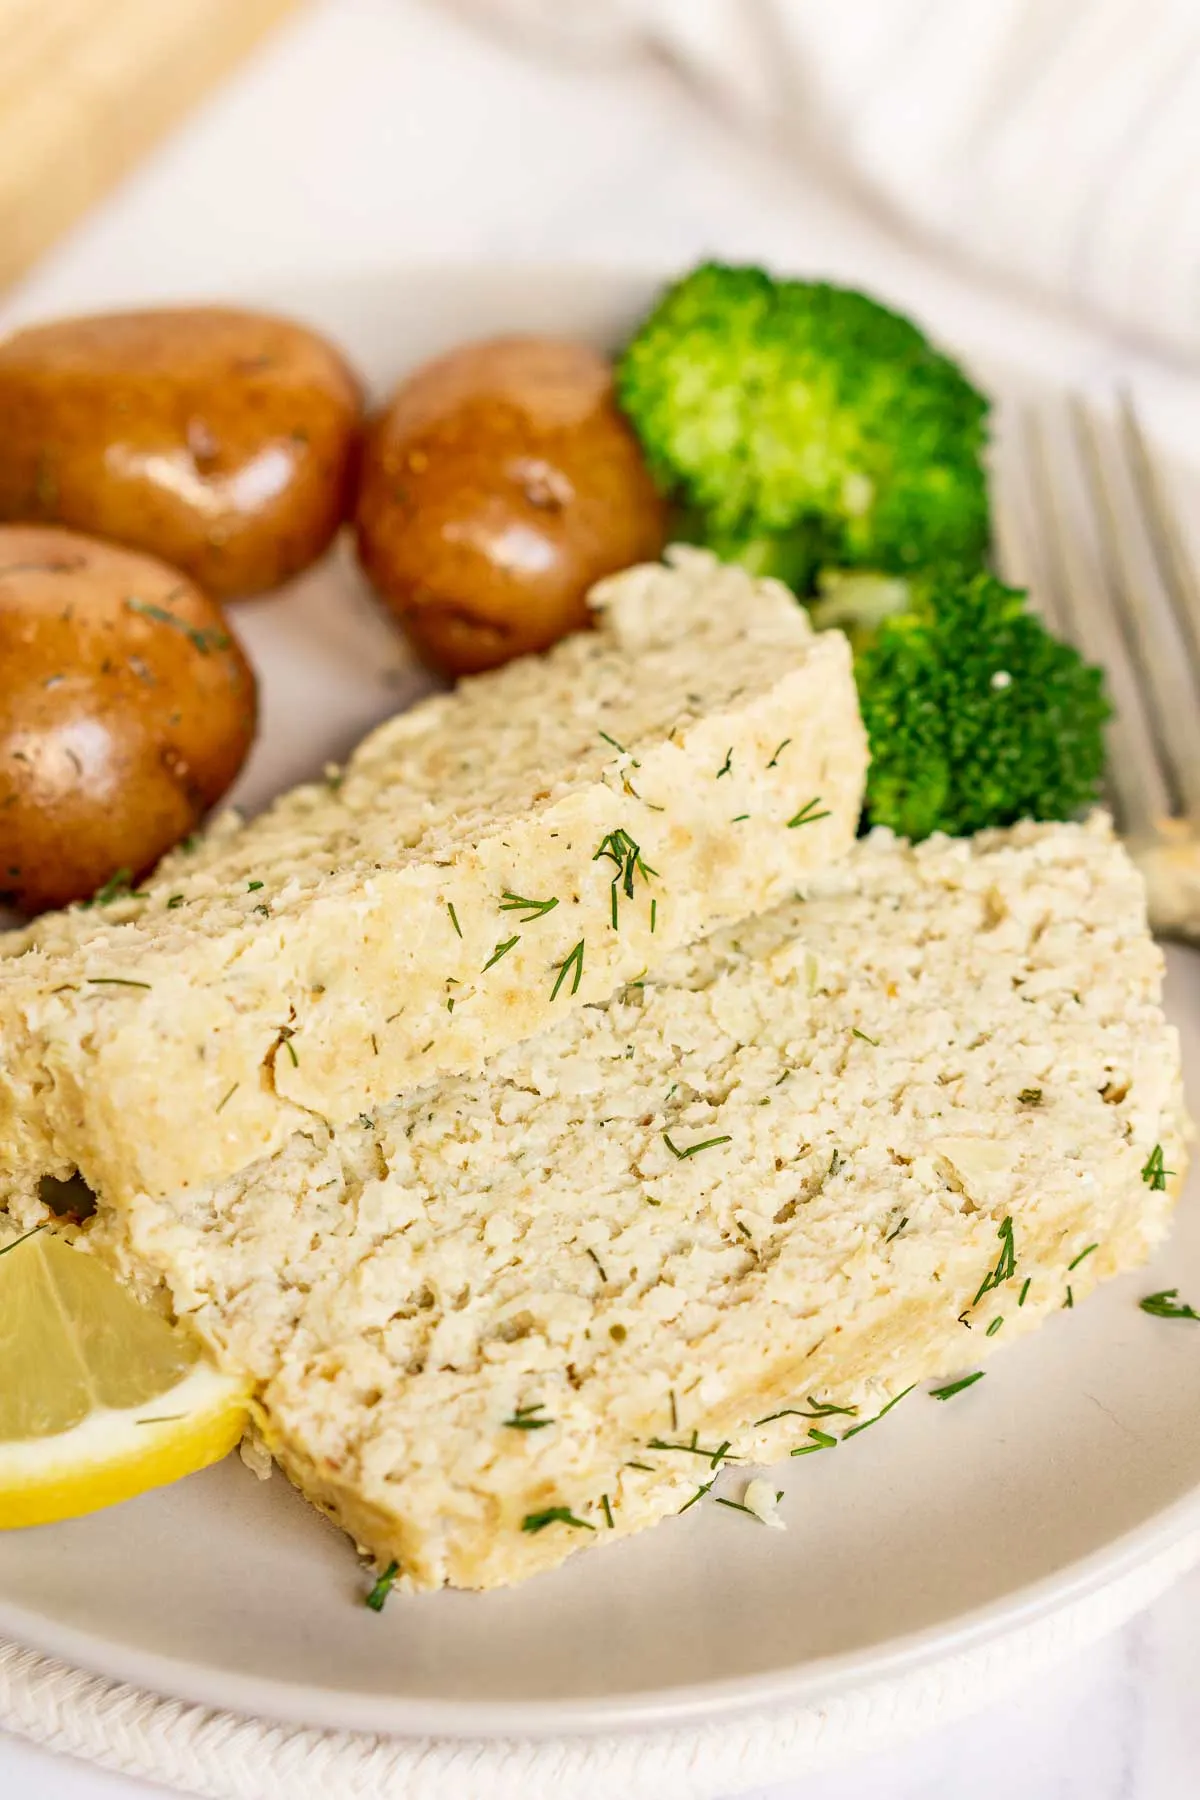 Slices of fish loaf on a plate with potatoes and broccoli